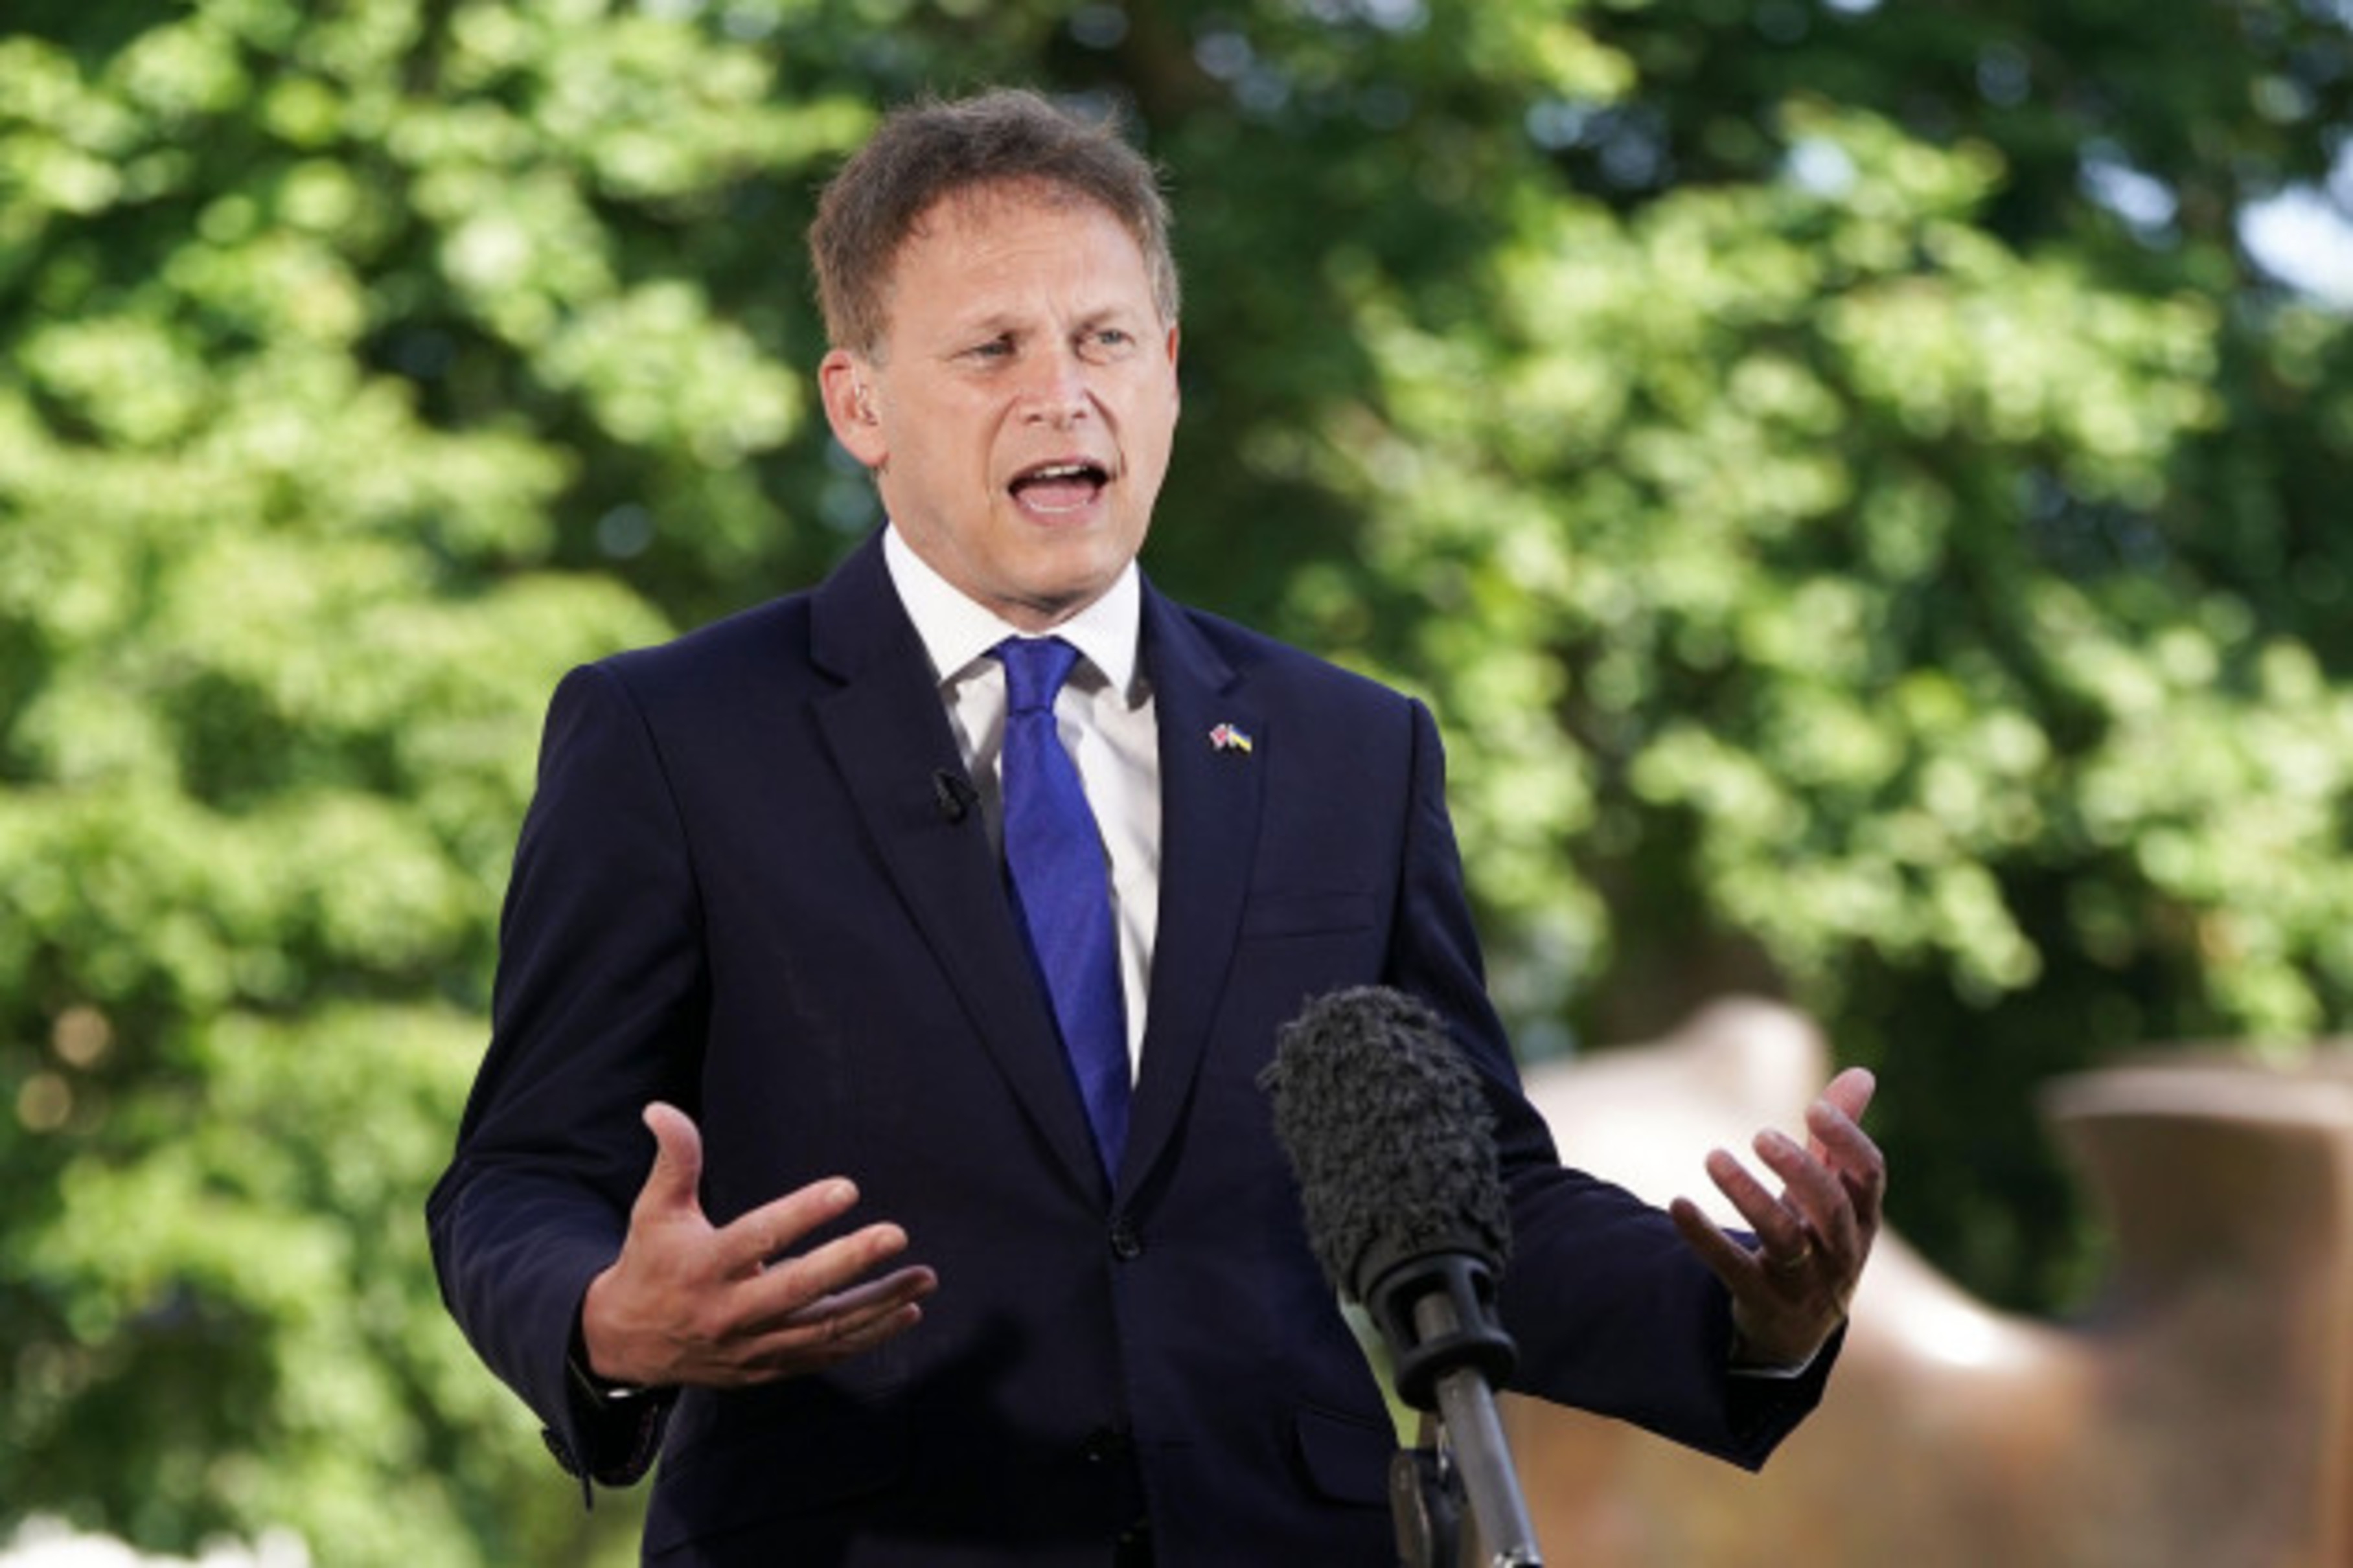 file-photo-dated-2062022-of-transport-secretary-grant-shapps-the-government-is-being-accused-of-misleading-the-public-by-insisting-it-does-not-have-a-role-in-negotiations-to-resolve-the-bitter-ra